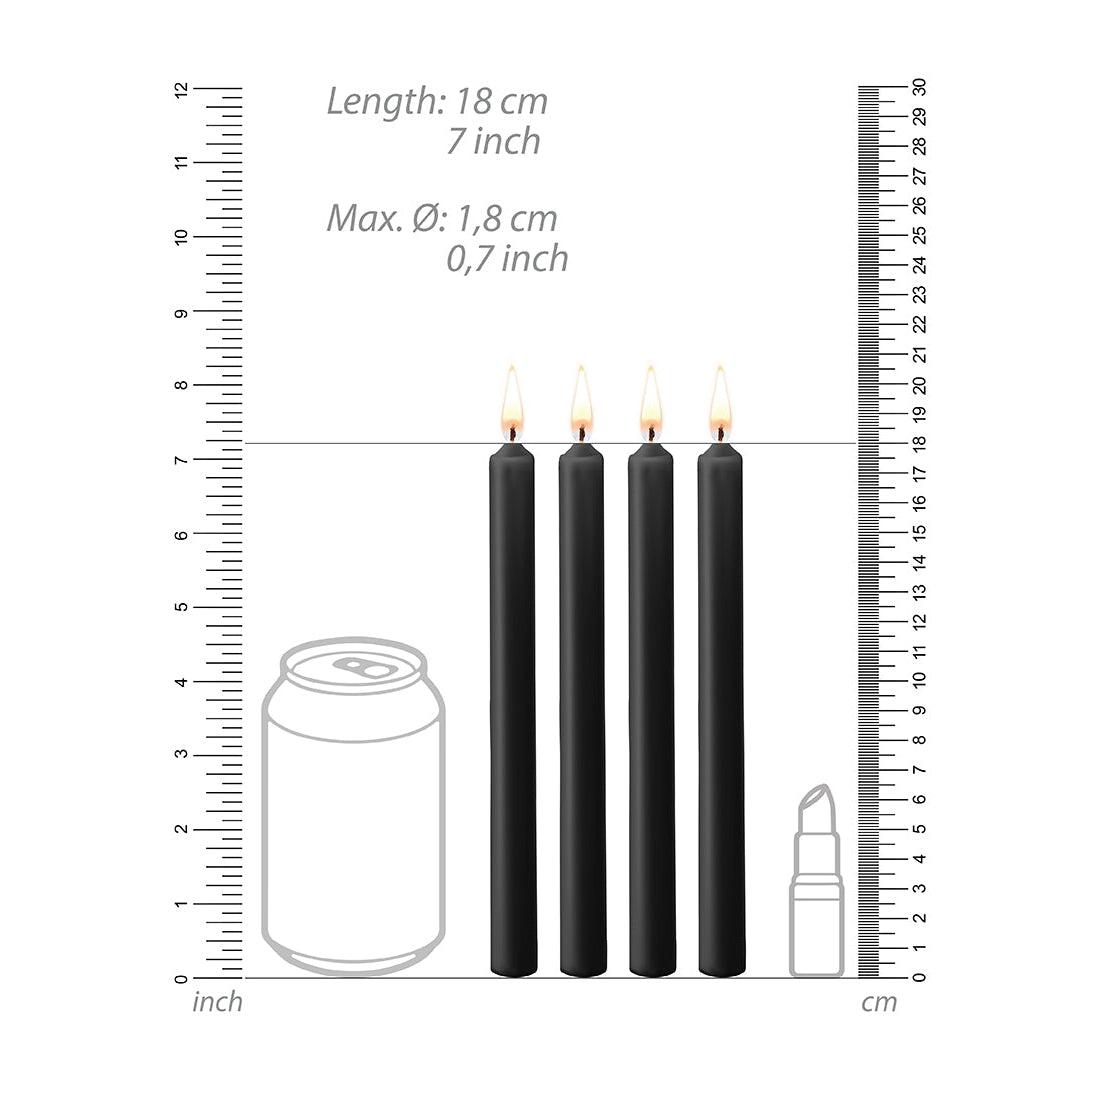 Teasing Wax Candles Large - Blk - 4-Pack